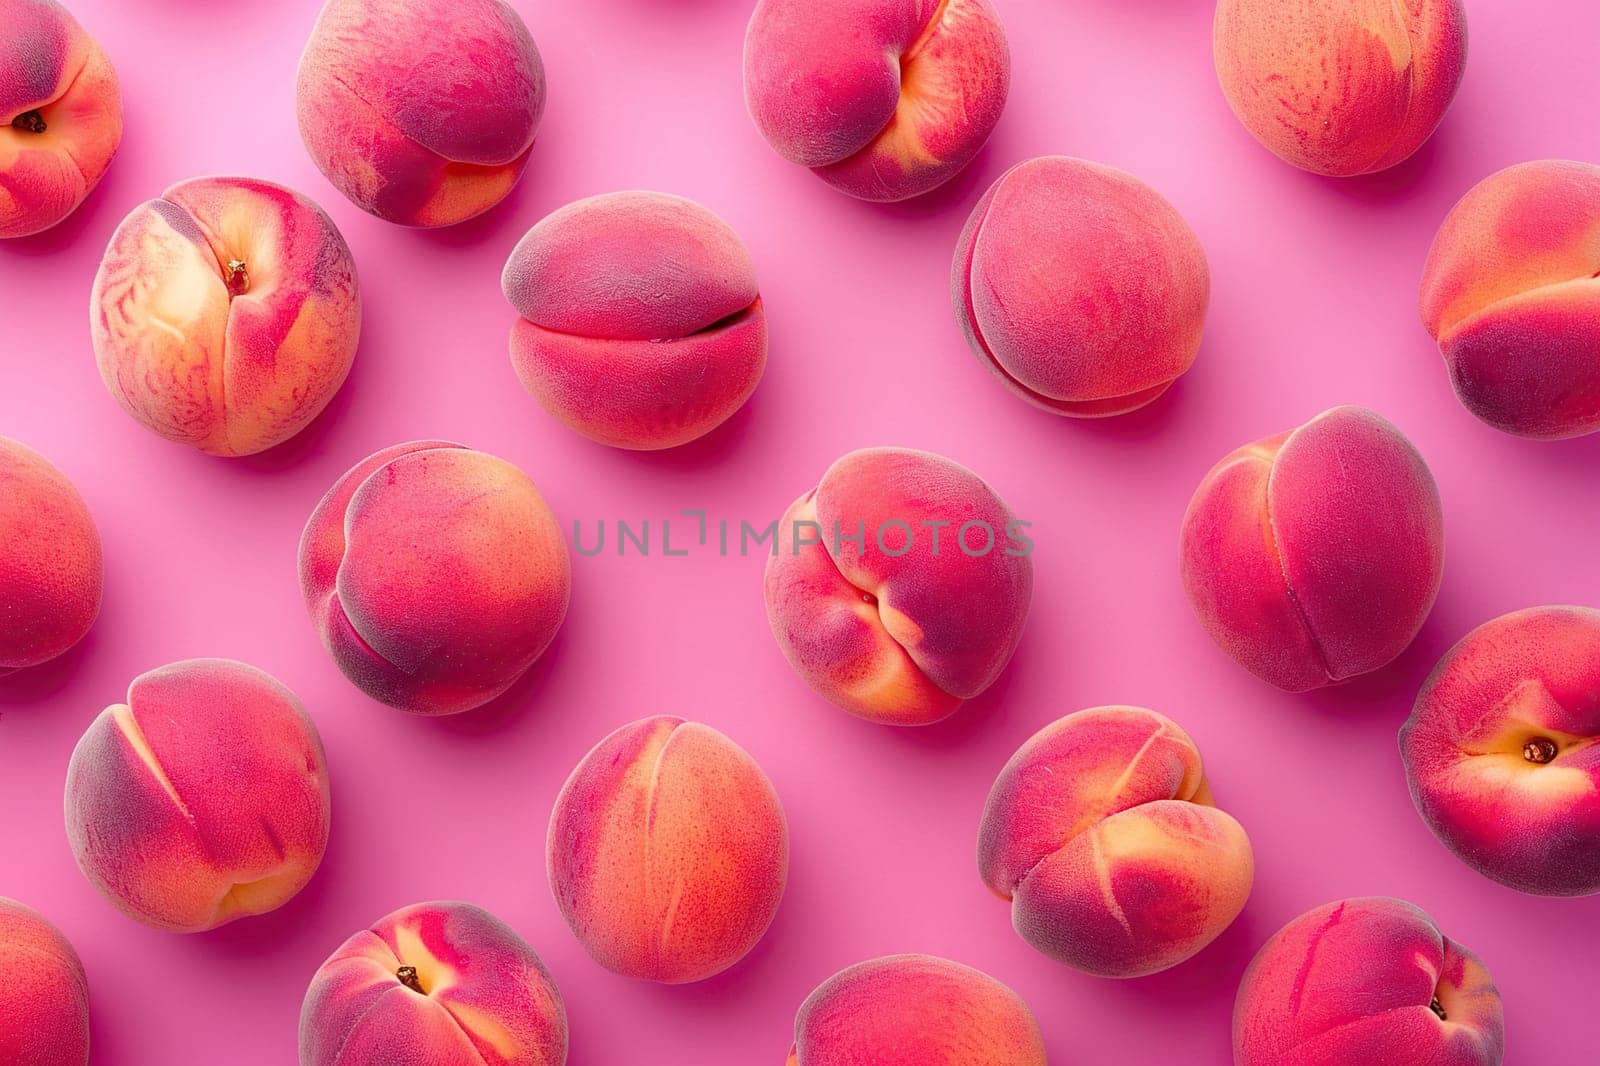 Ripe juicy peaches on a pink background, top view. Horizontal background.